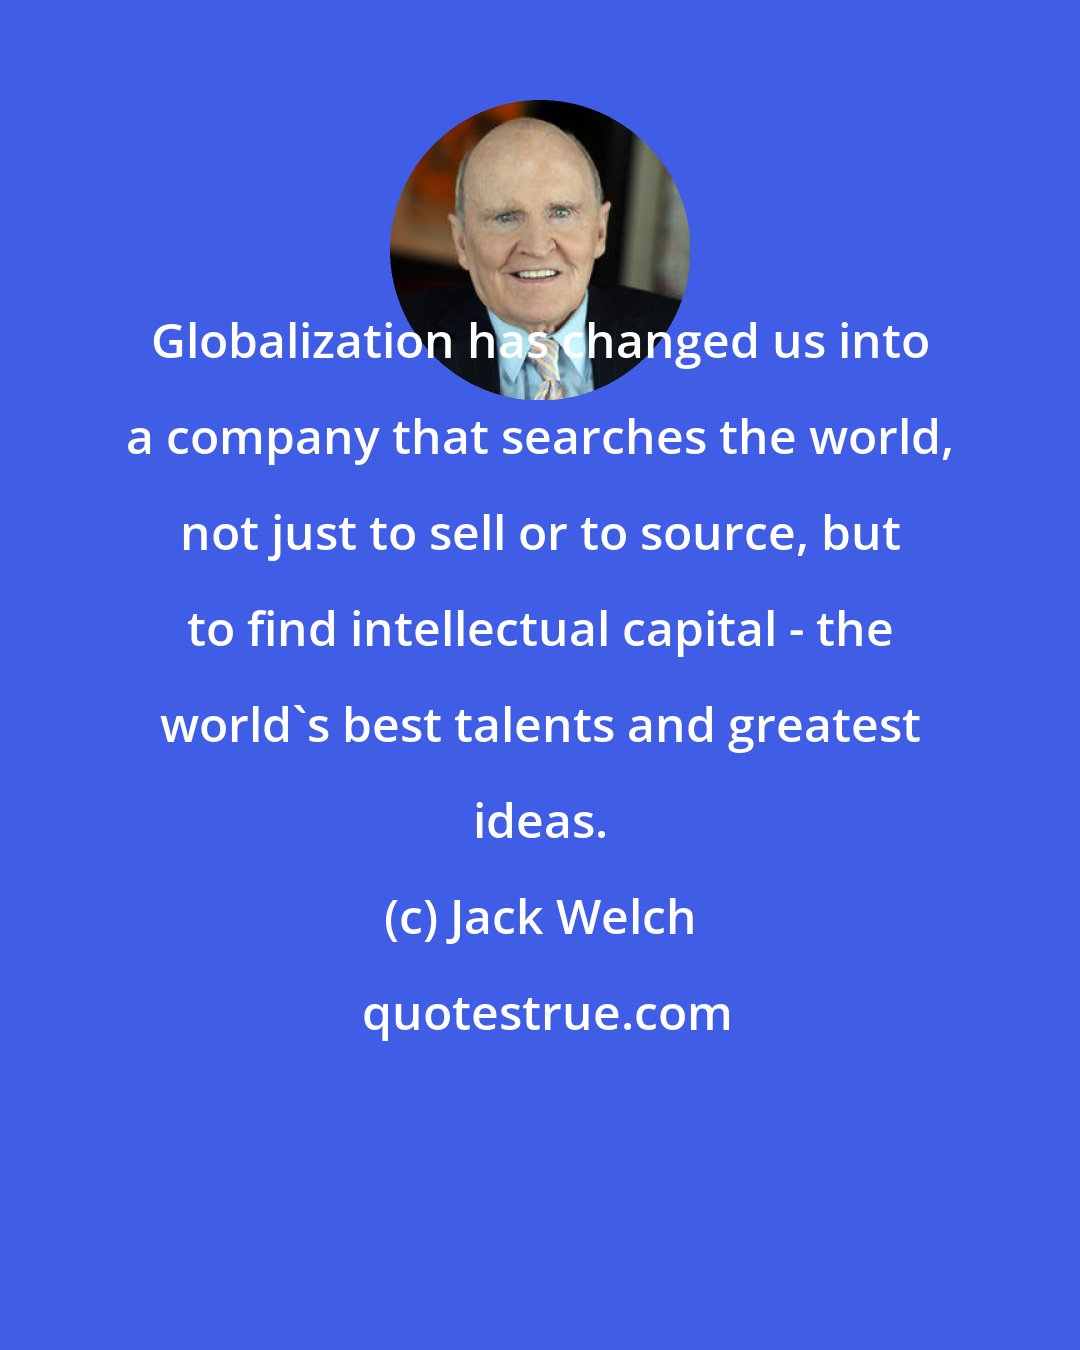 Jack Welch: Globalization has changed us into a company that searches the world, not just to sell or to source, but to find intellectual capital - the world's best talents and greatest ideas.